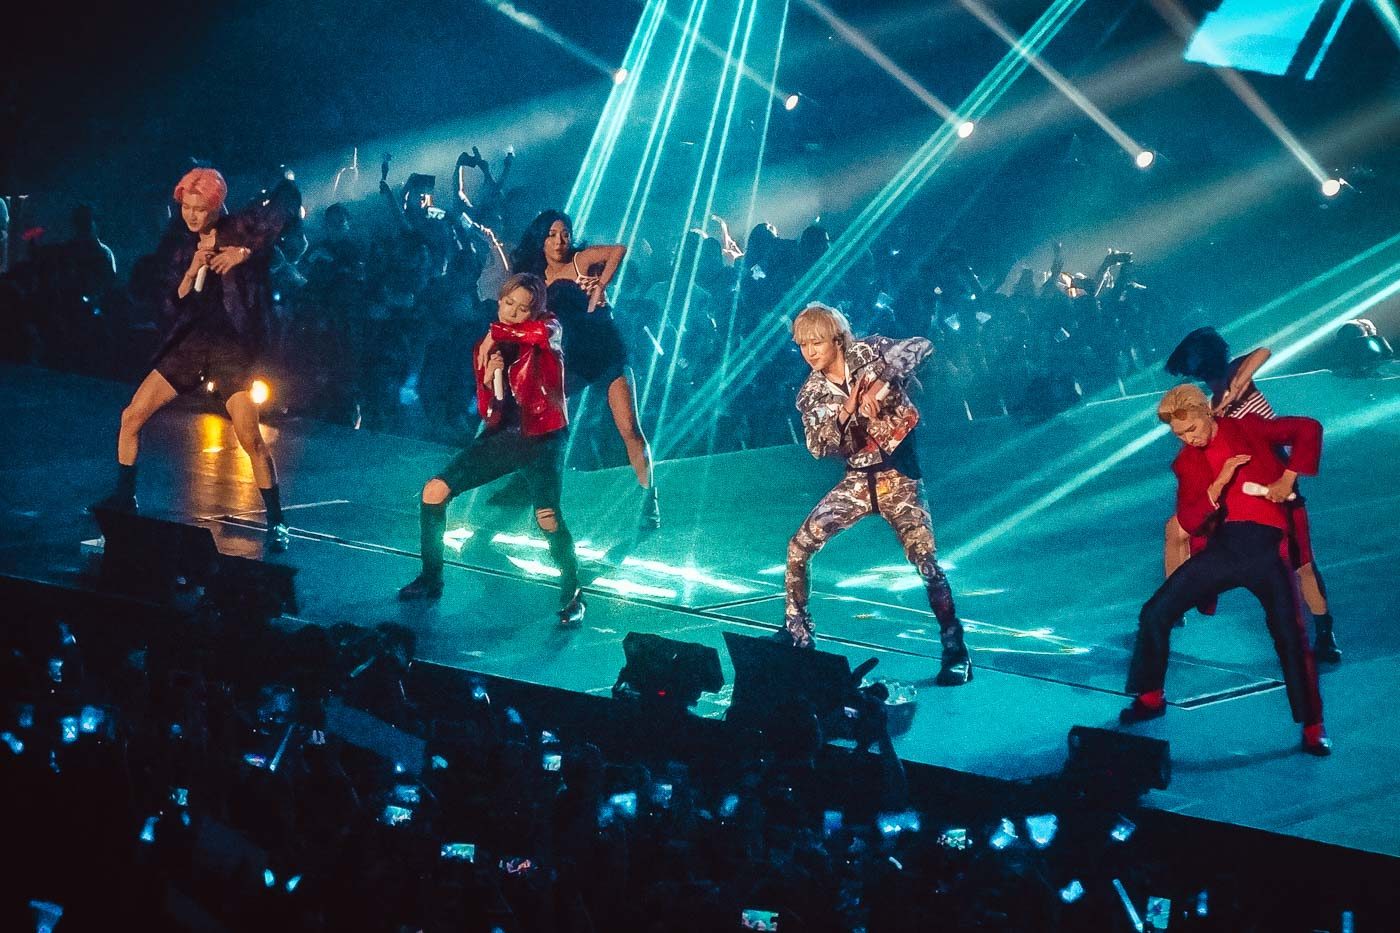 HIGHLIGHTS: WINNER charms Filipino fans during Manila concert